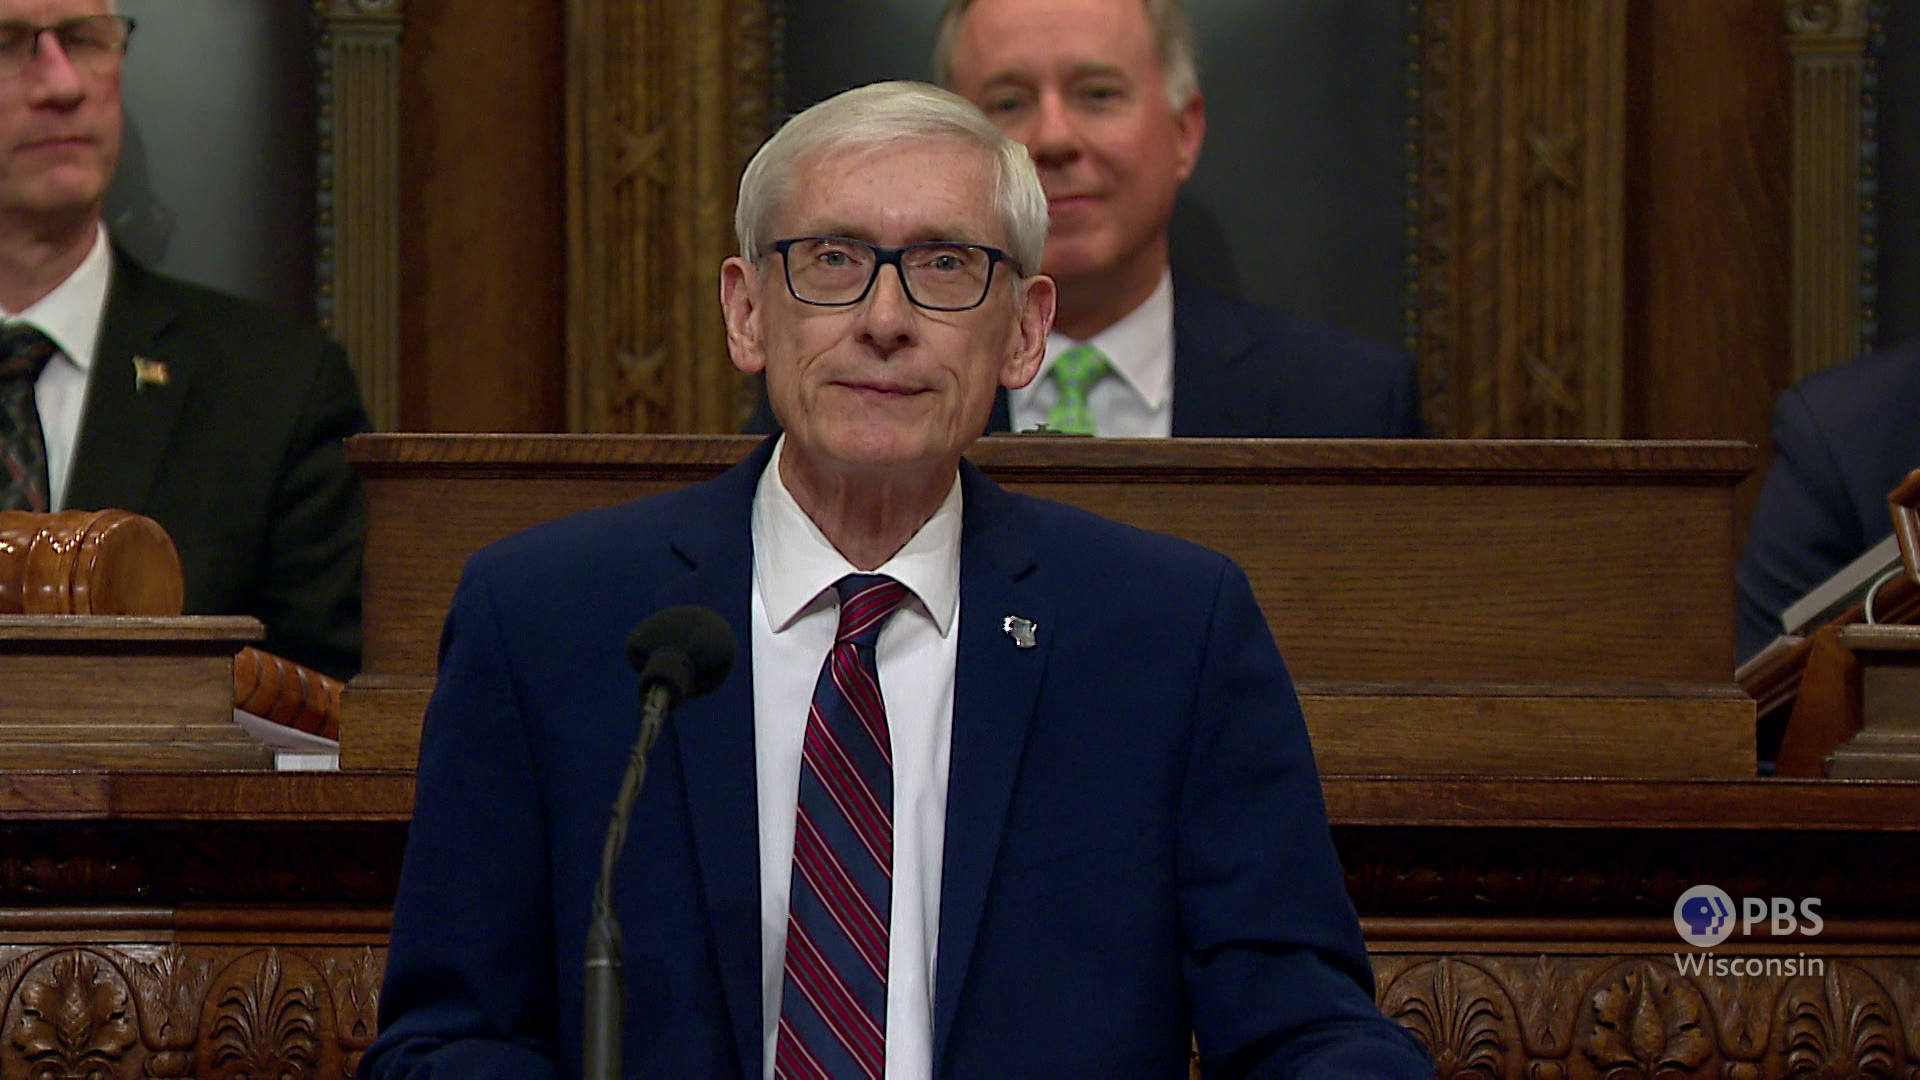 Highlights from the 2023 Wisconsin budget plan proposed by Evers